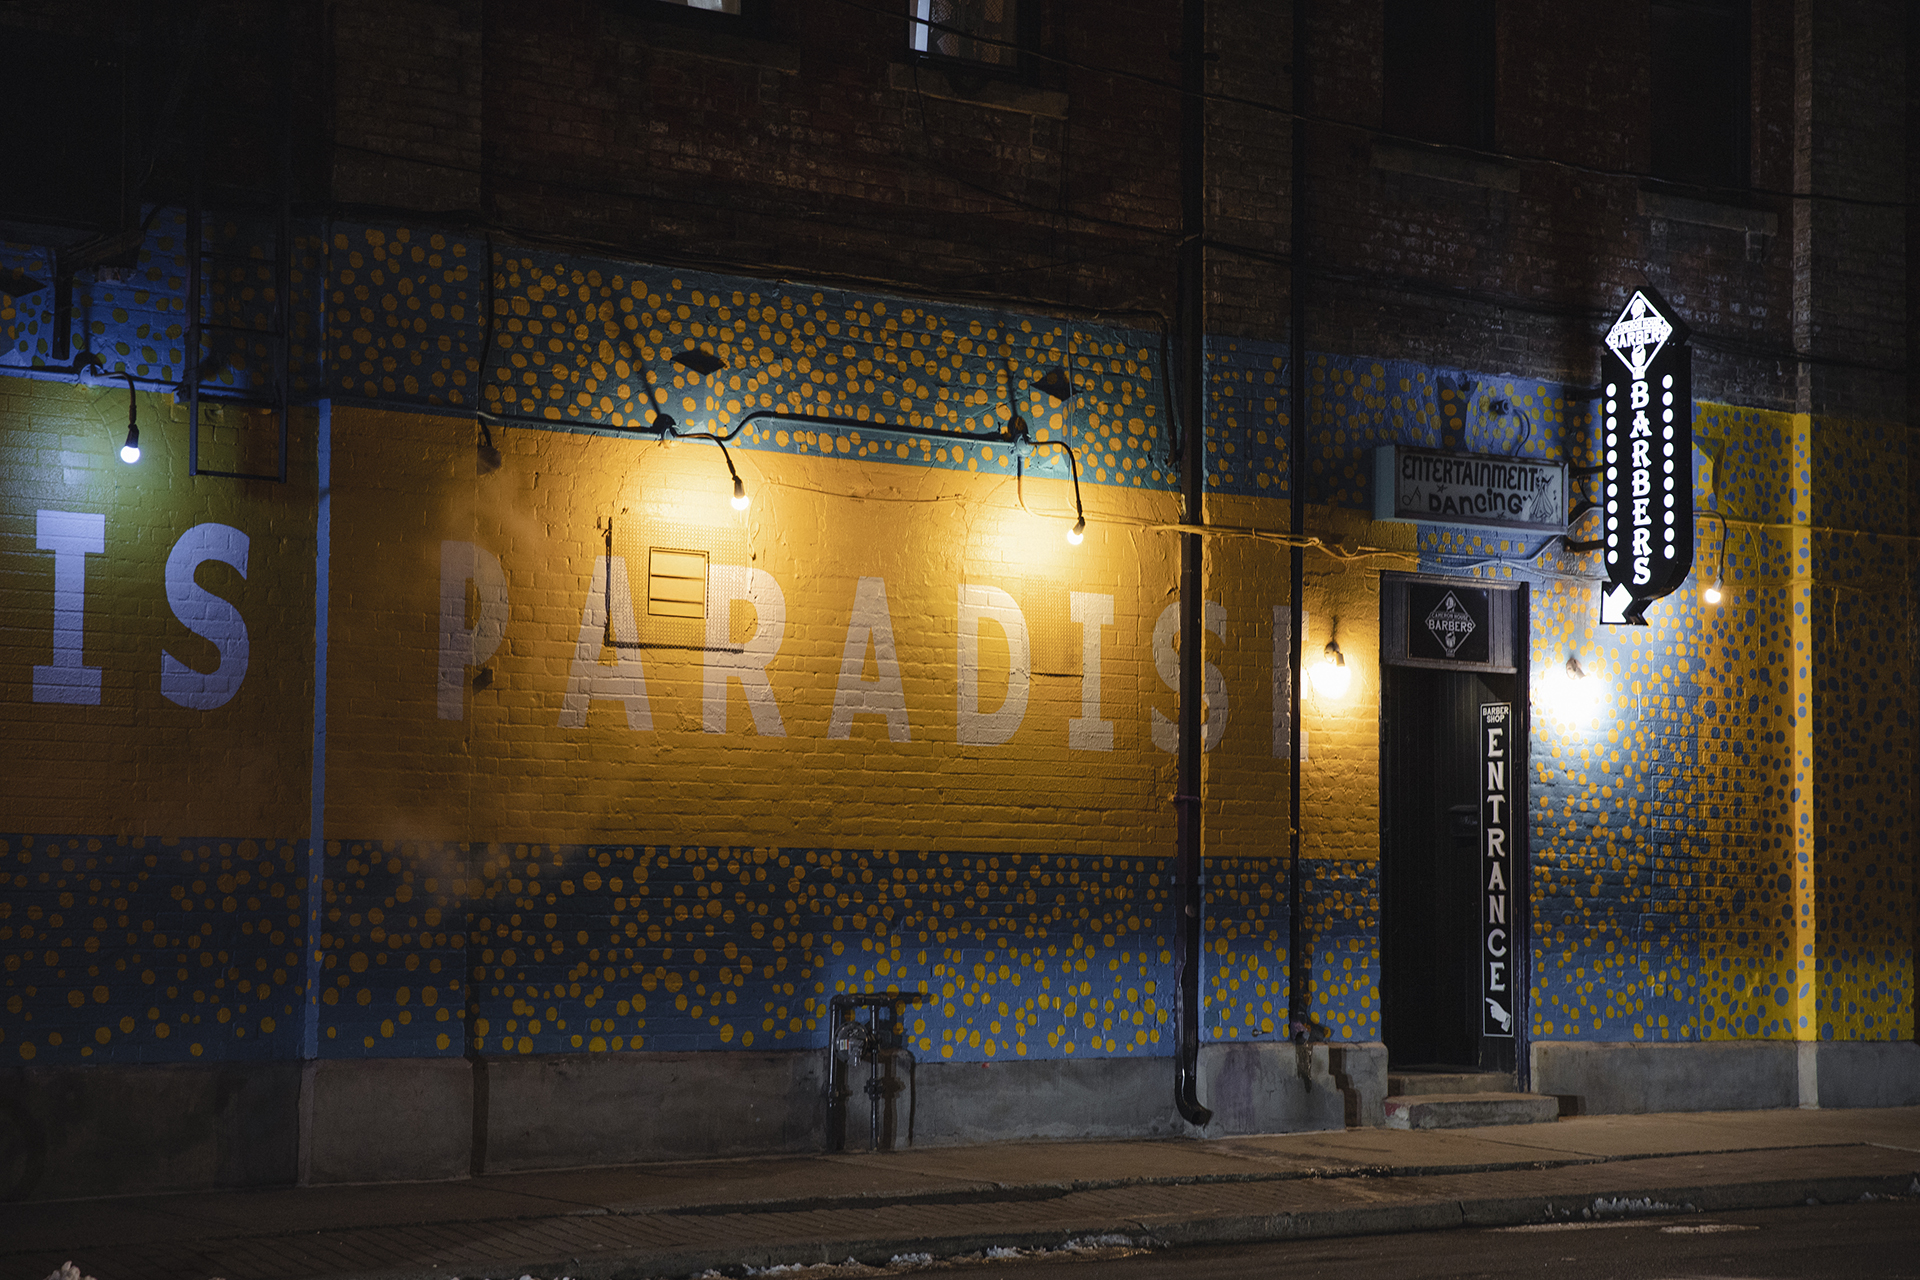 An empty sidewalk and building wall at night. The wall has some unpainted bricks on top, but most of it is painted with a blue and yellow speckled design. In the middle of the wall is a yellow banner that has the words "IS PARADISE" painted across it. After these words, there is a small black door that says "entrance" on it, as well as a glowing sign with an arrow pointing towards the door.